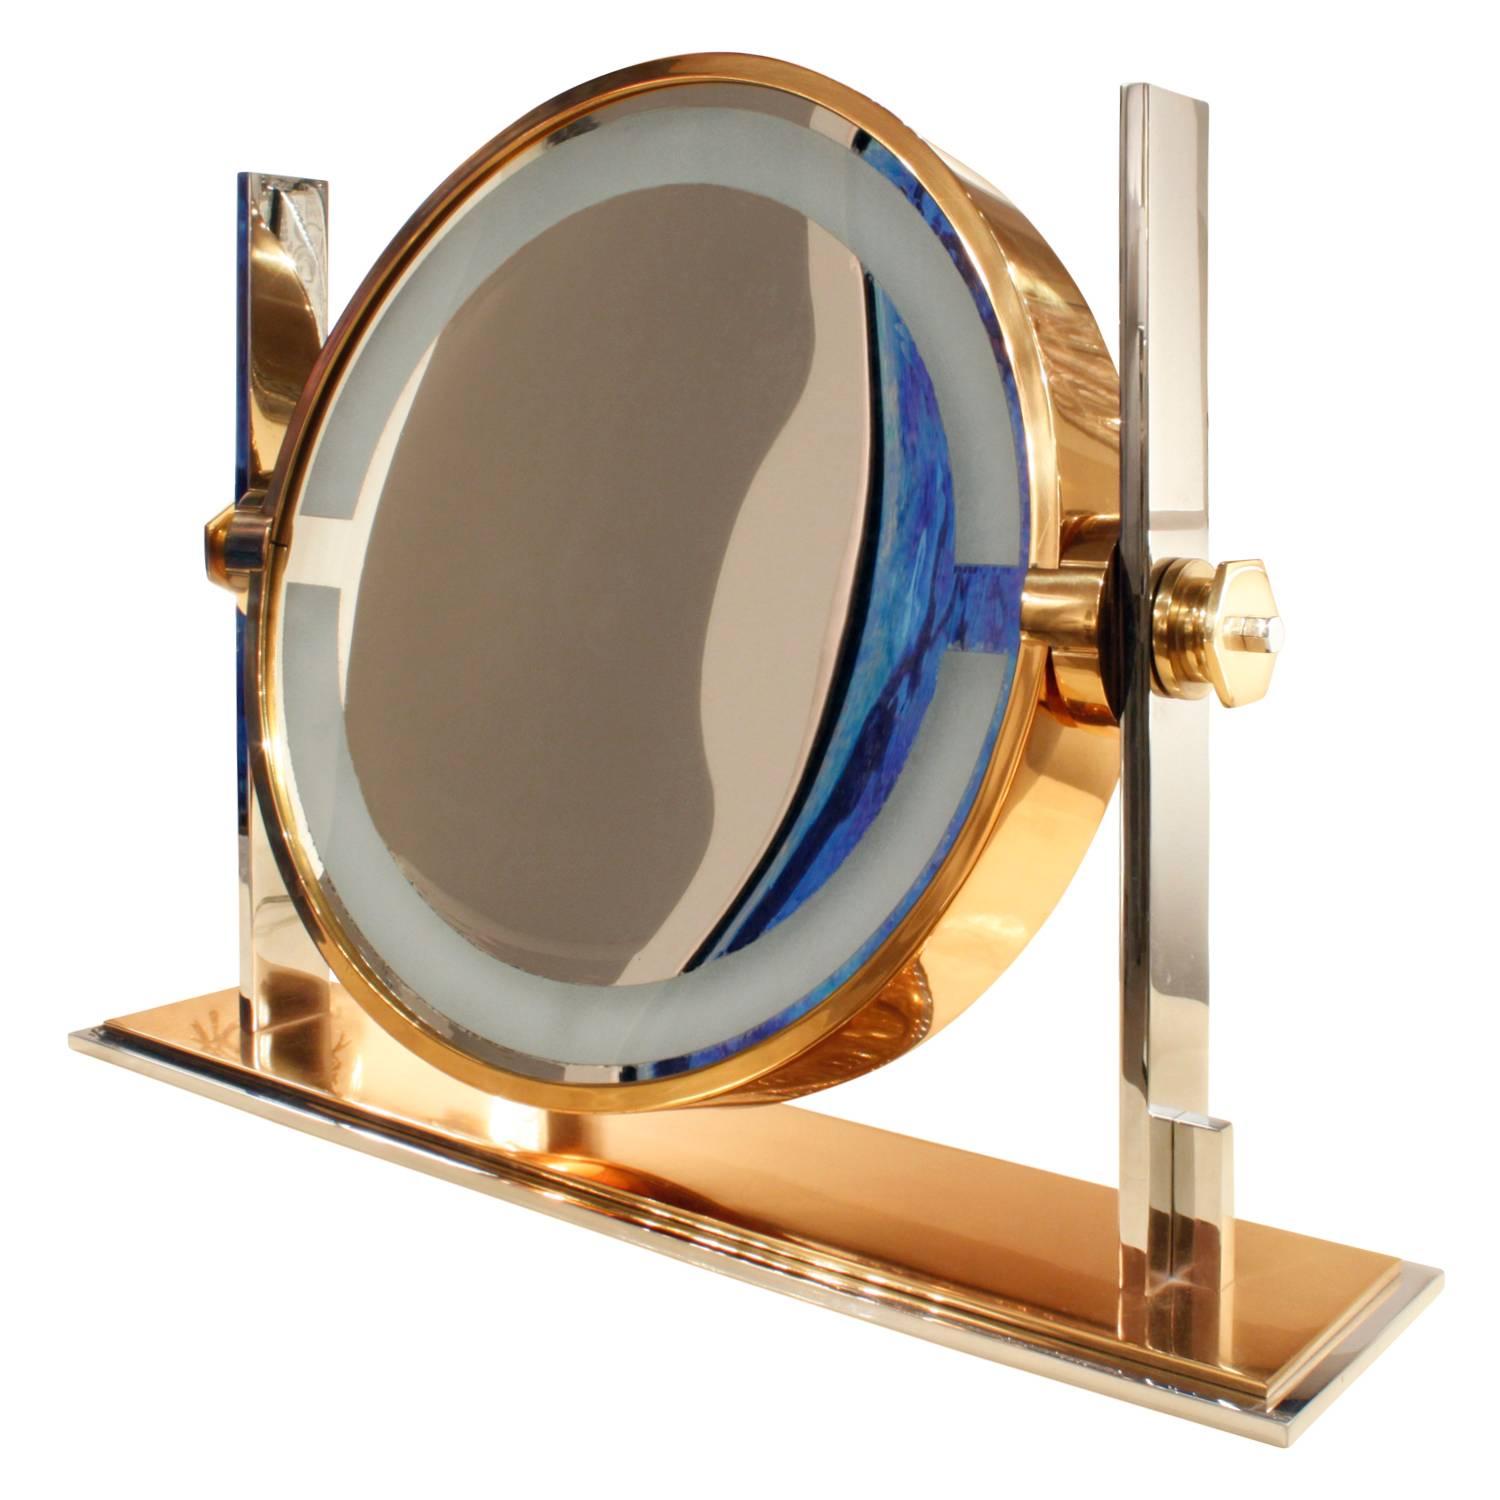 Exceptional and meticulously crafted illuminating vanity mirror in polished steel and gold lacquered brass with magnifier by Karl Springer, American, 1980s. This large vanity mirror is very impressive.